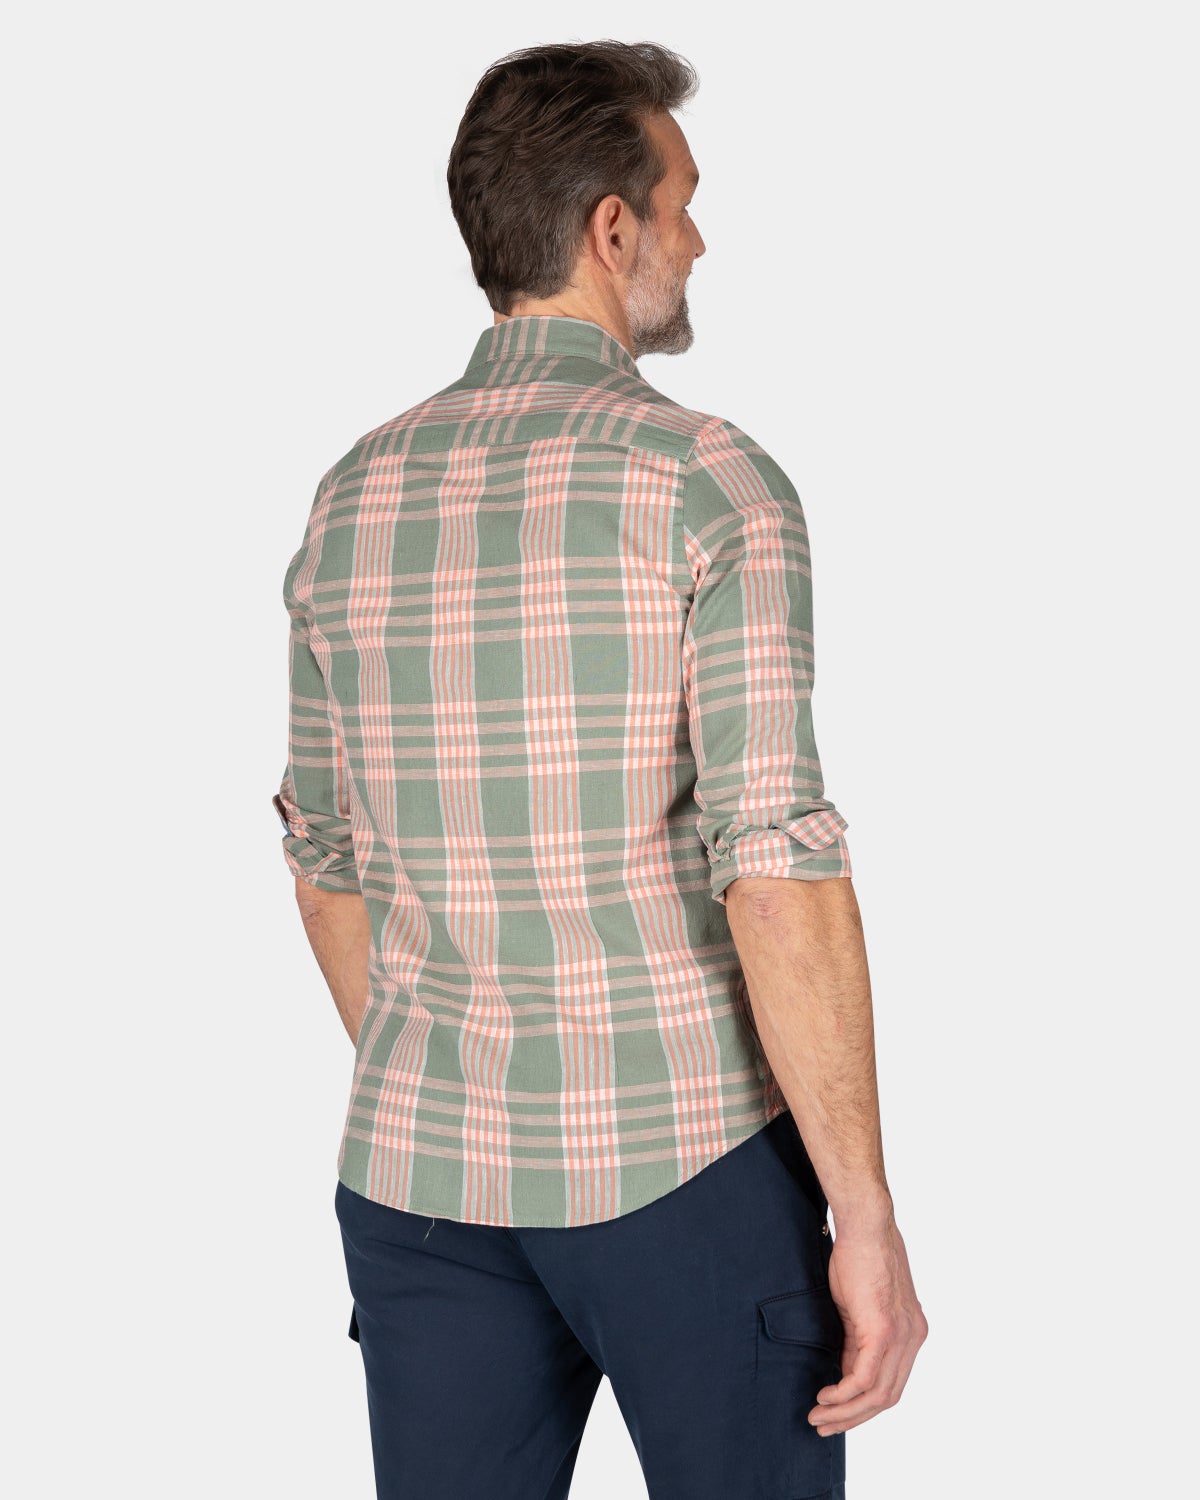 Checked shirt pink and green - Mellow Army